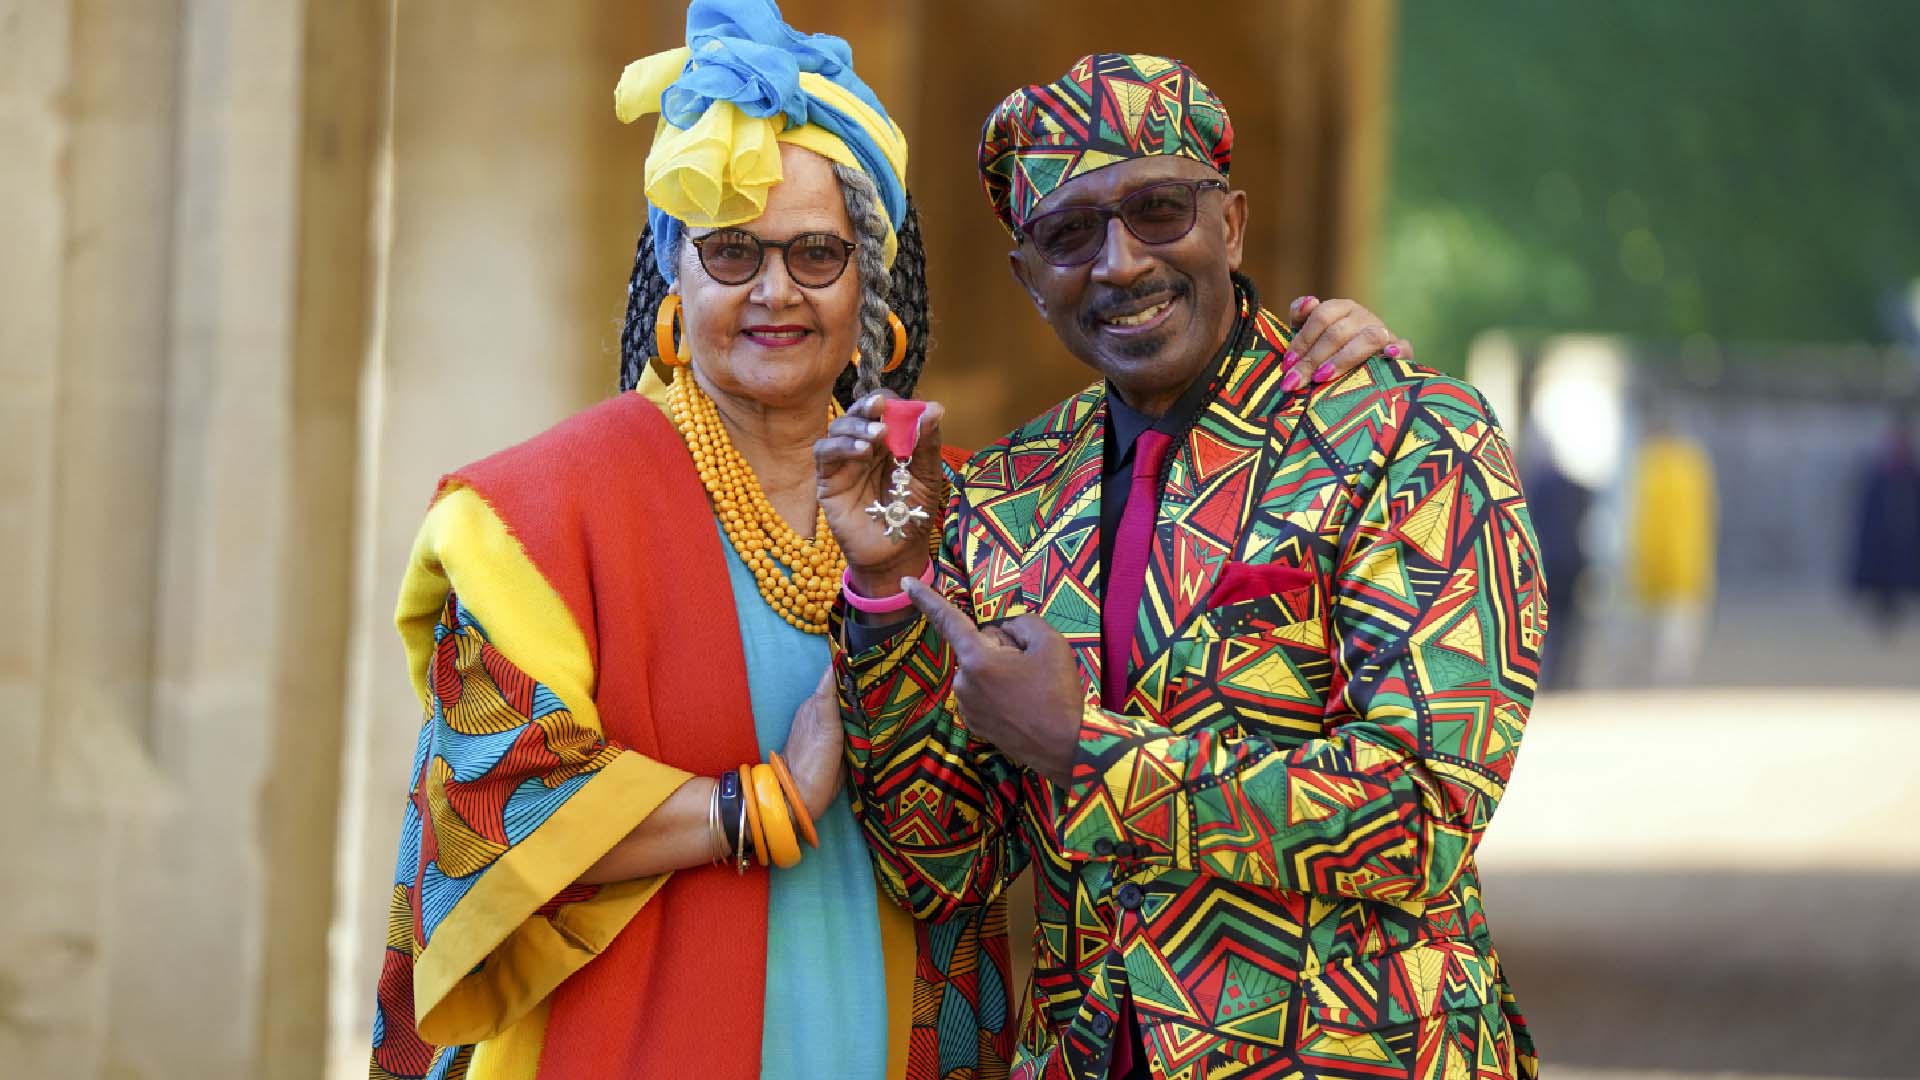 Mr Motivator was awarded an MBE for services to health and fitness